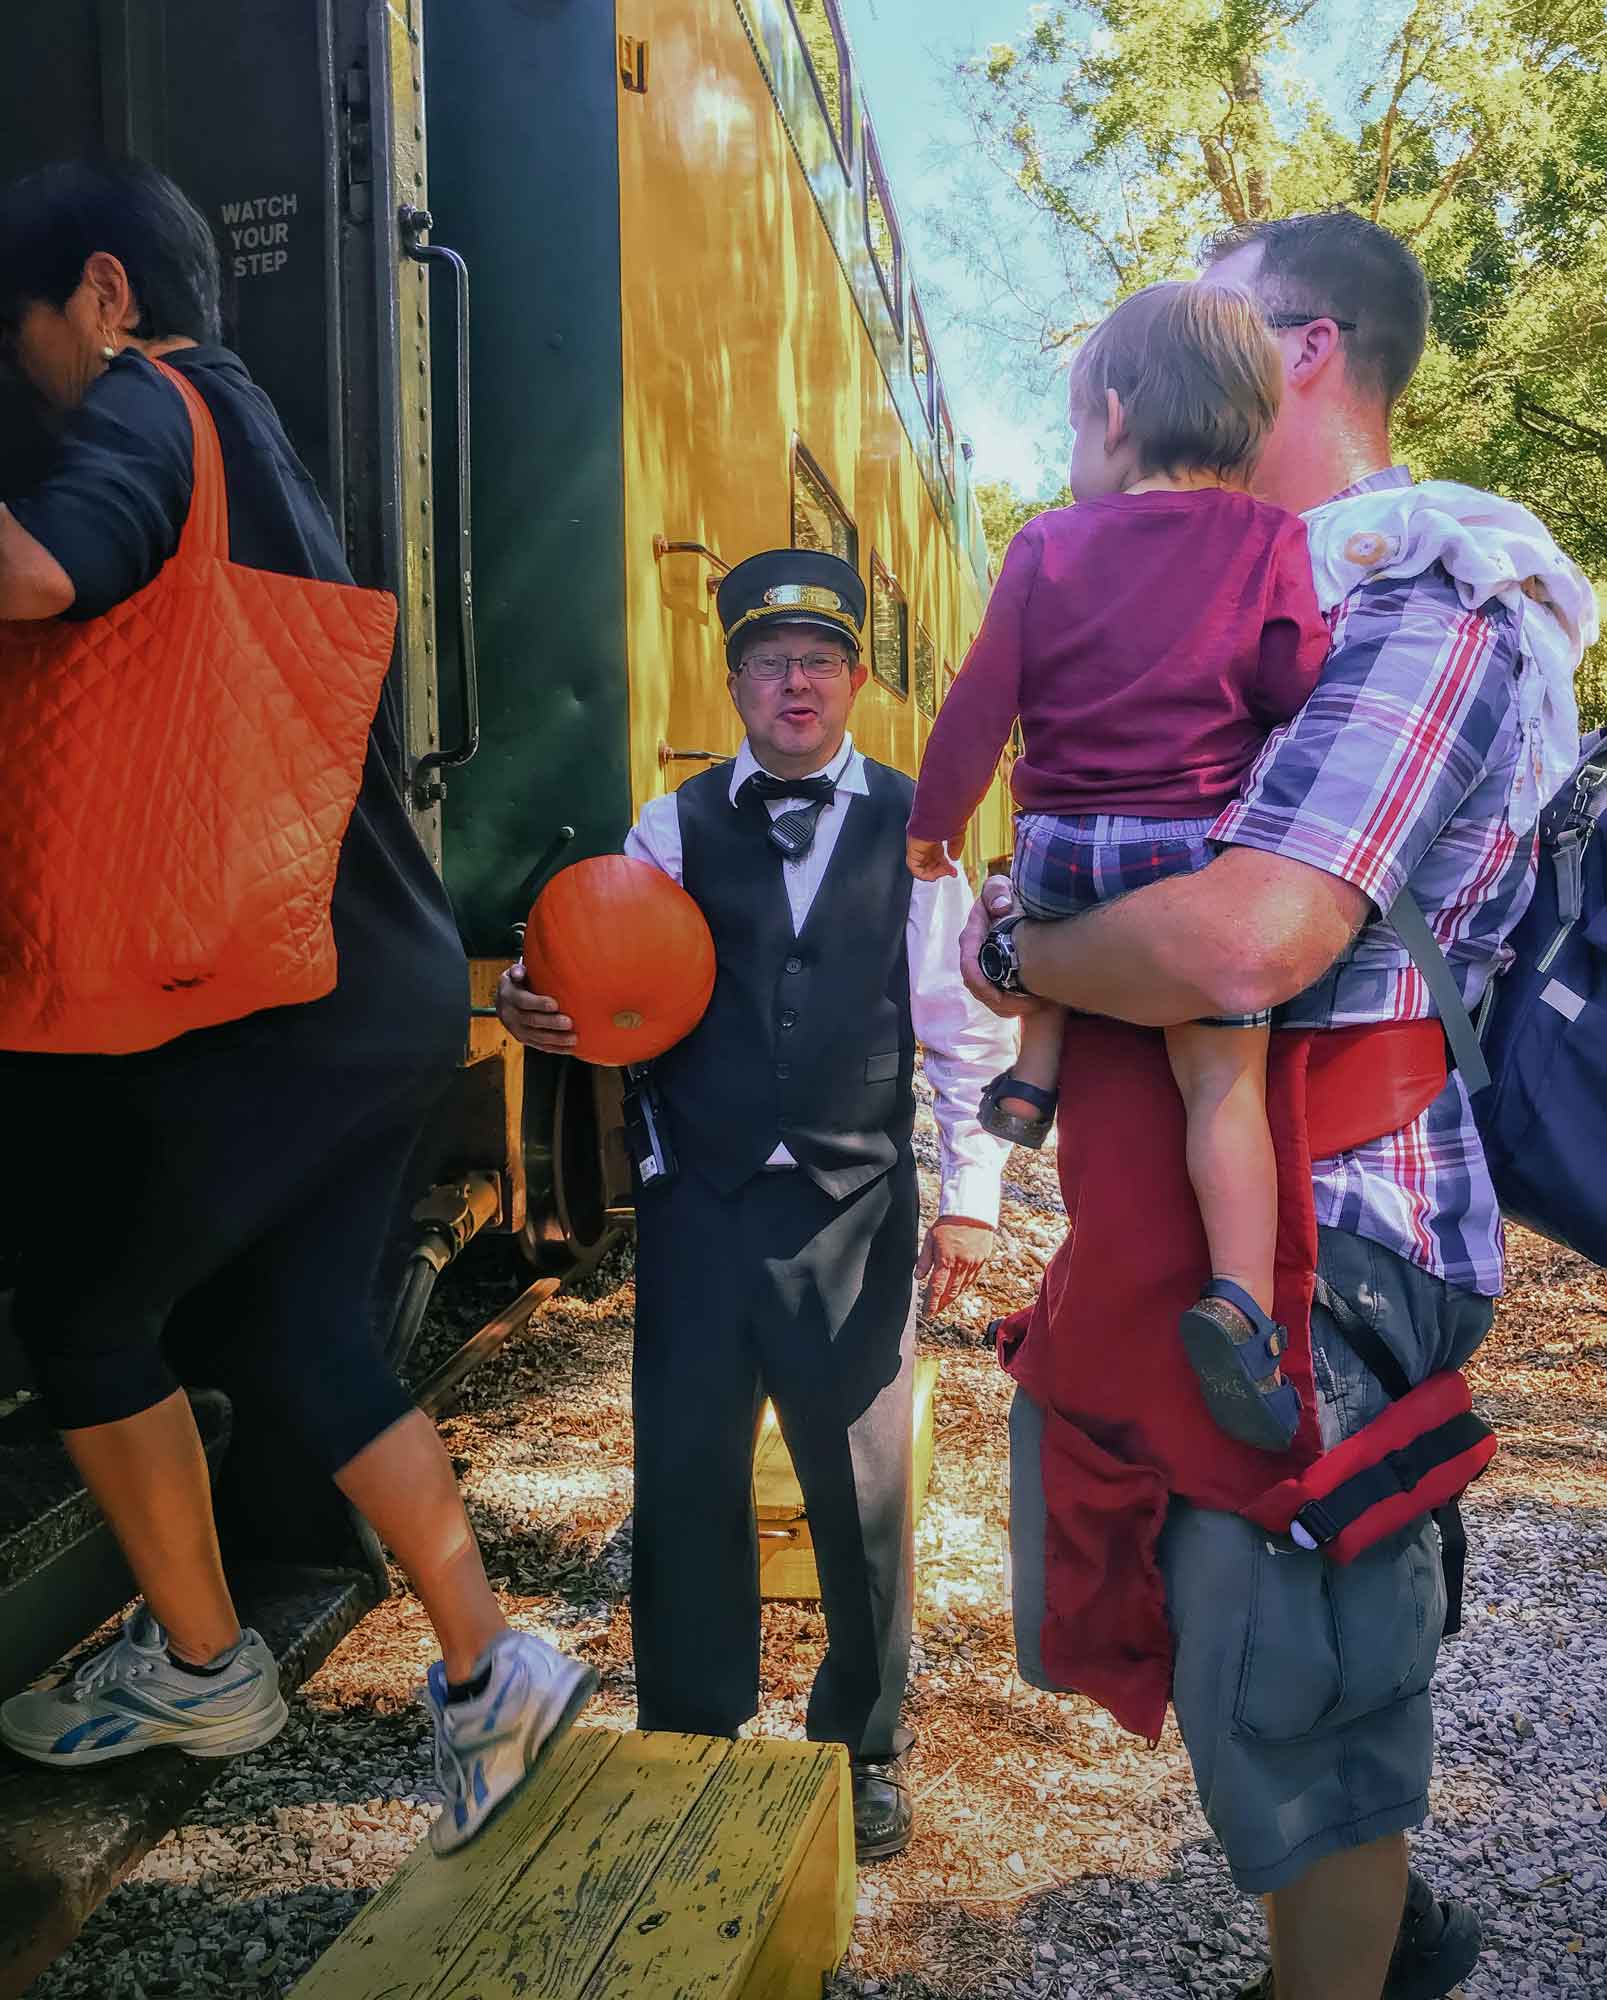 Conductor holding a pumpkin while helping passenge